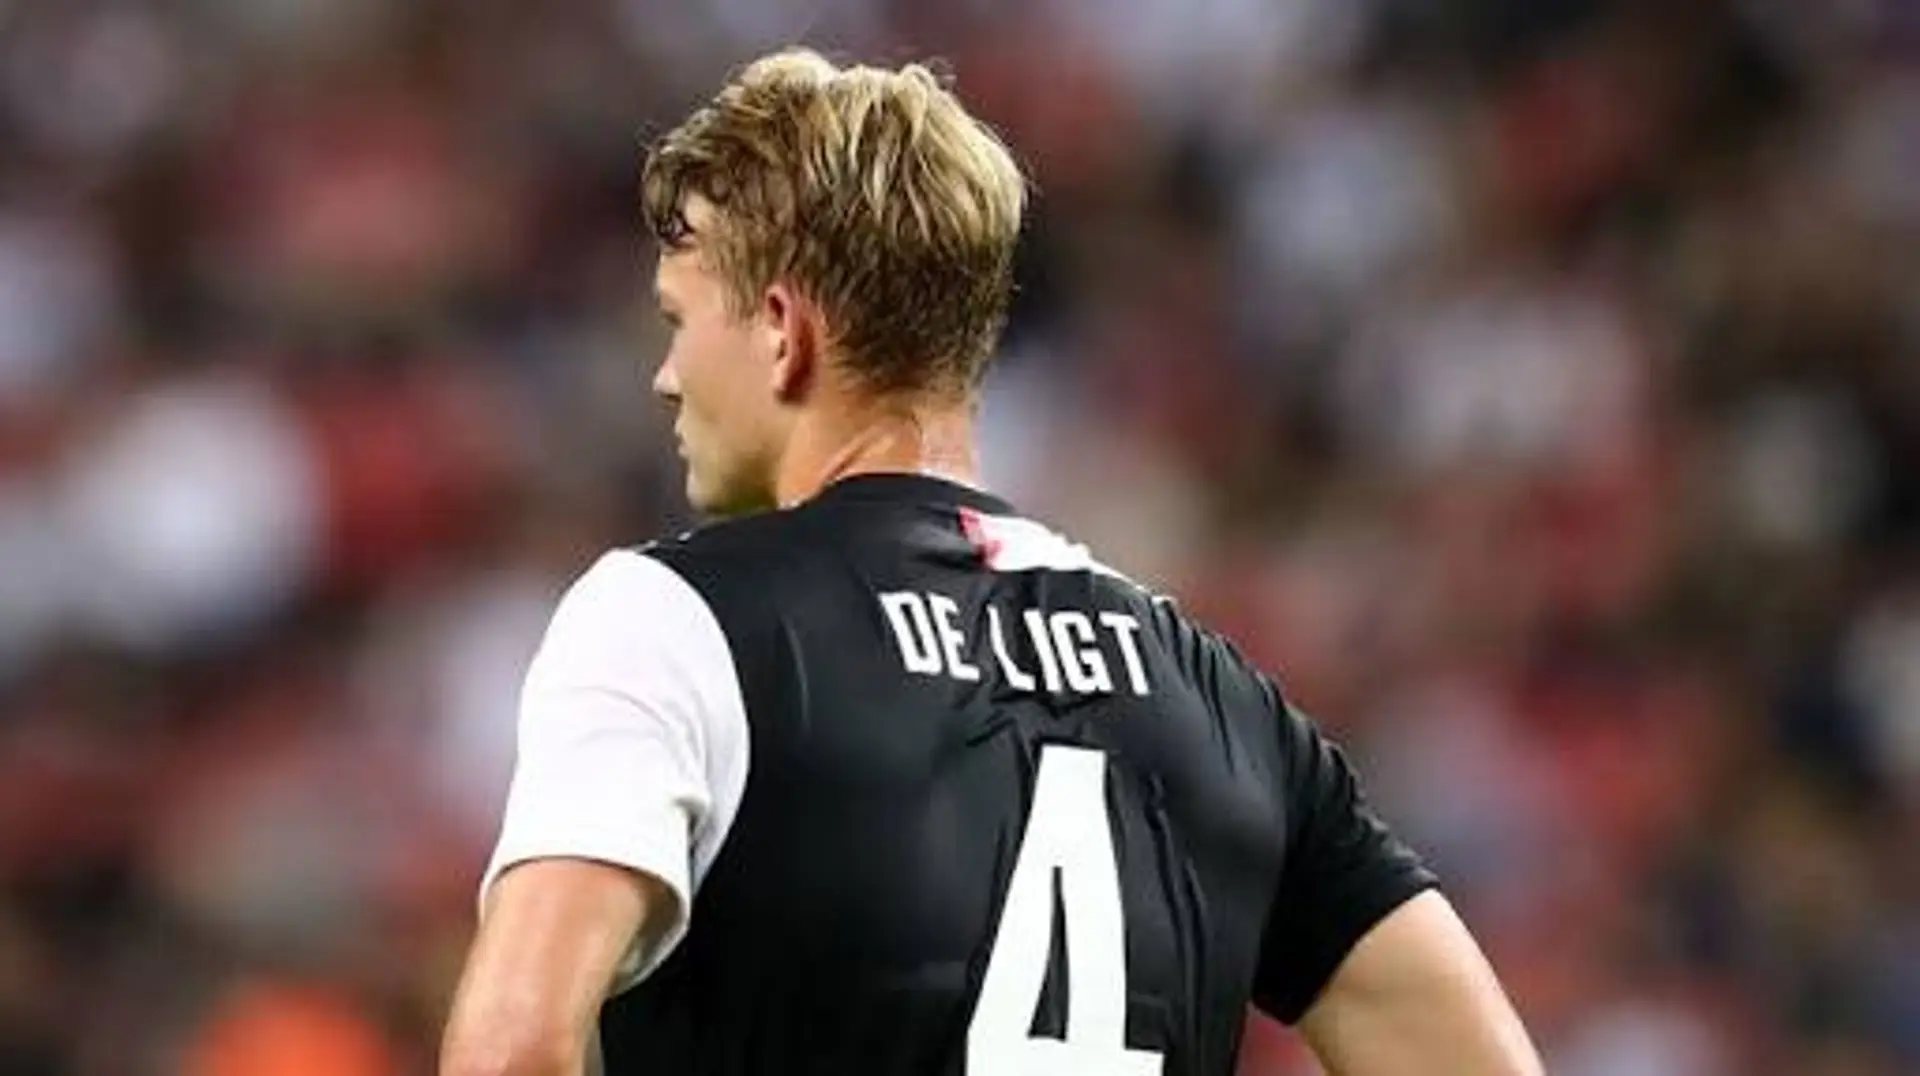 It will be delight to buy De Ligt and start a new season delightfully